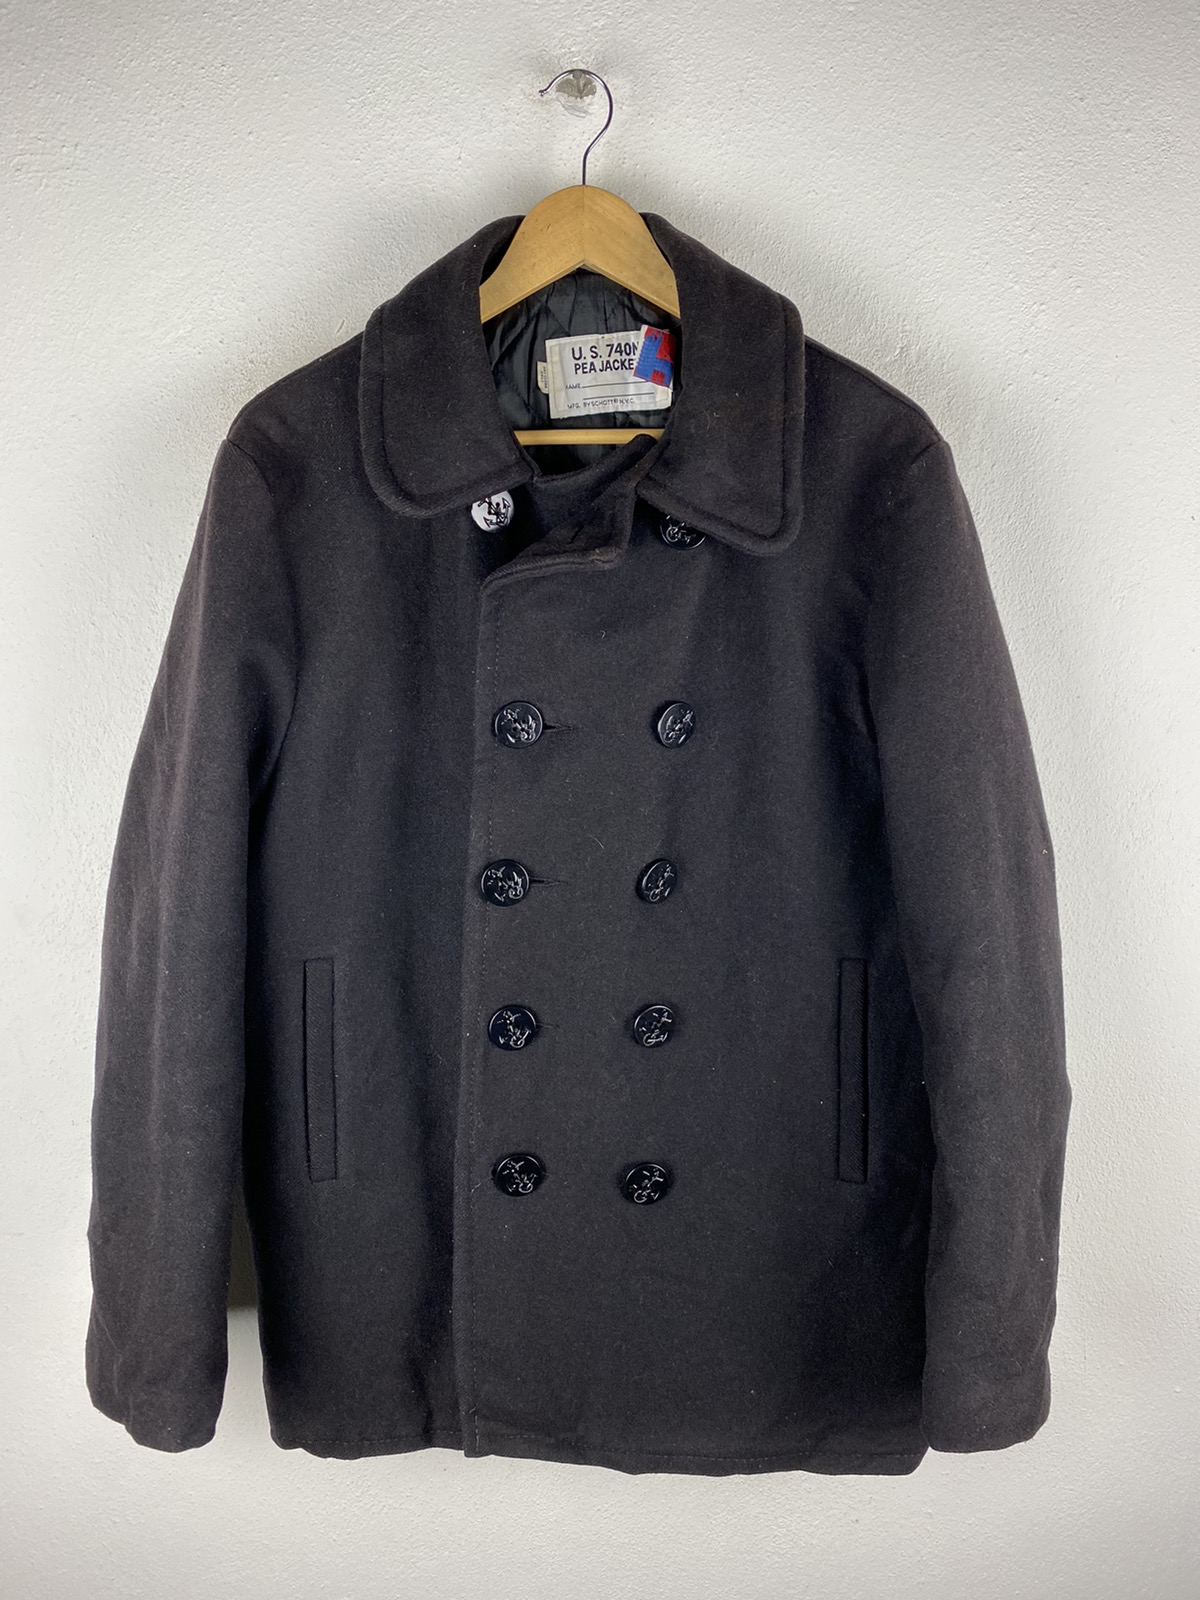 🔥SALE🔥aU.S 740N PEA JACKET BY SCHOTT MADE IN USA - 4